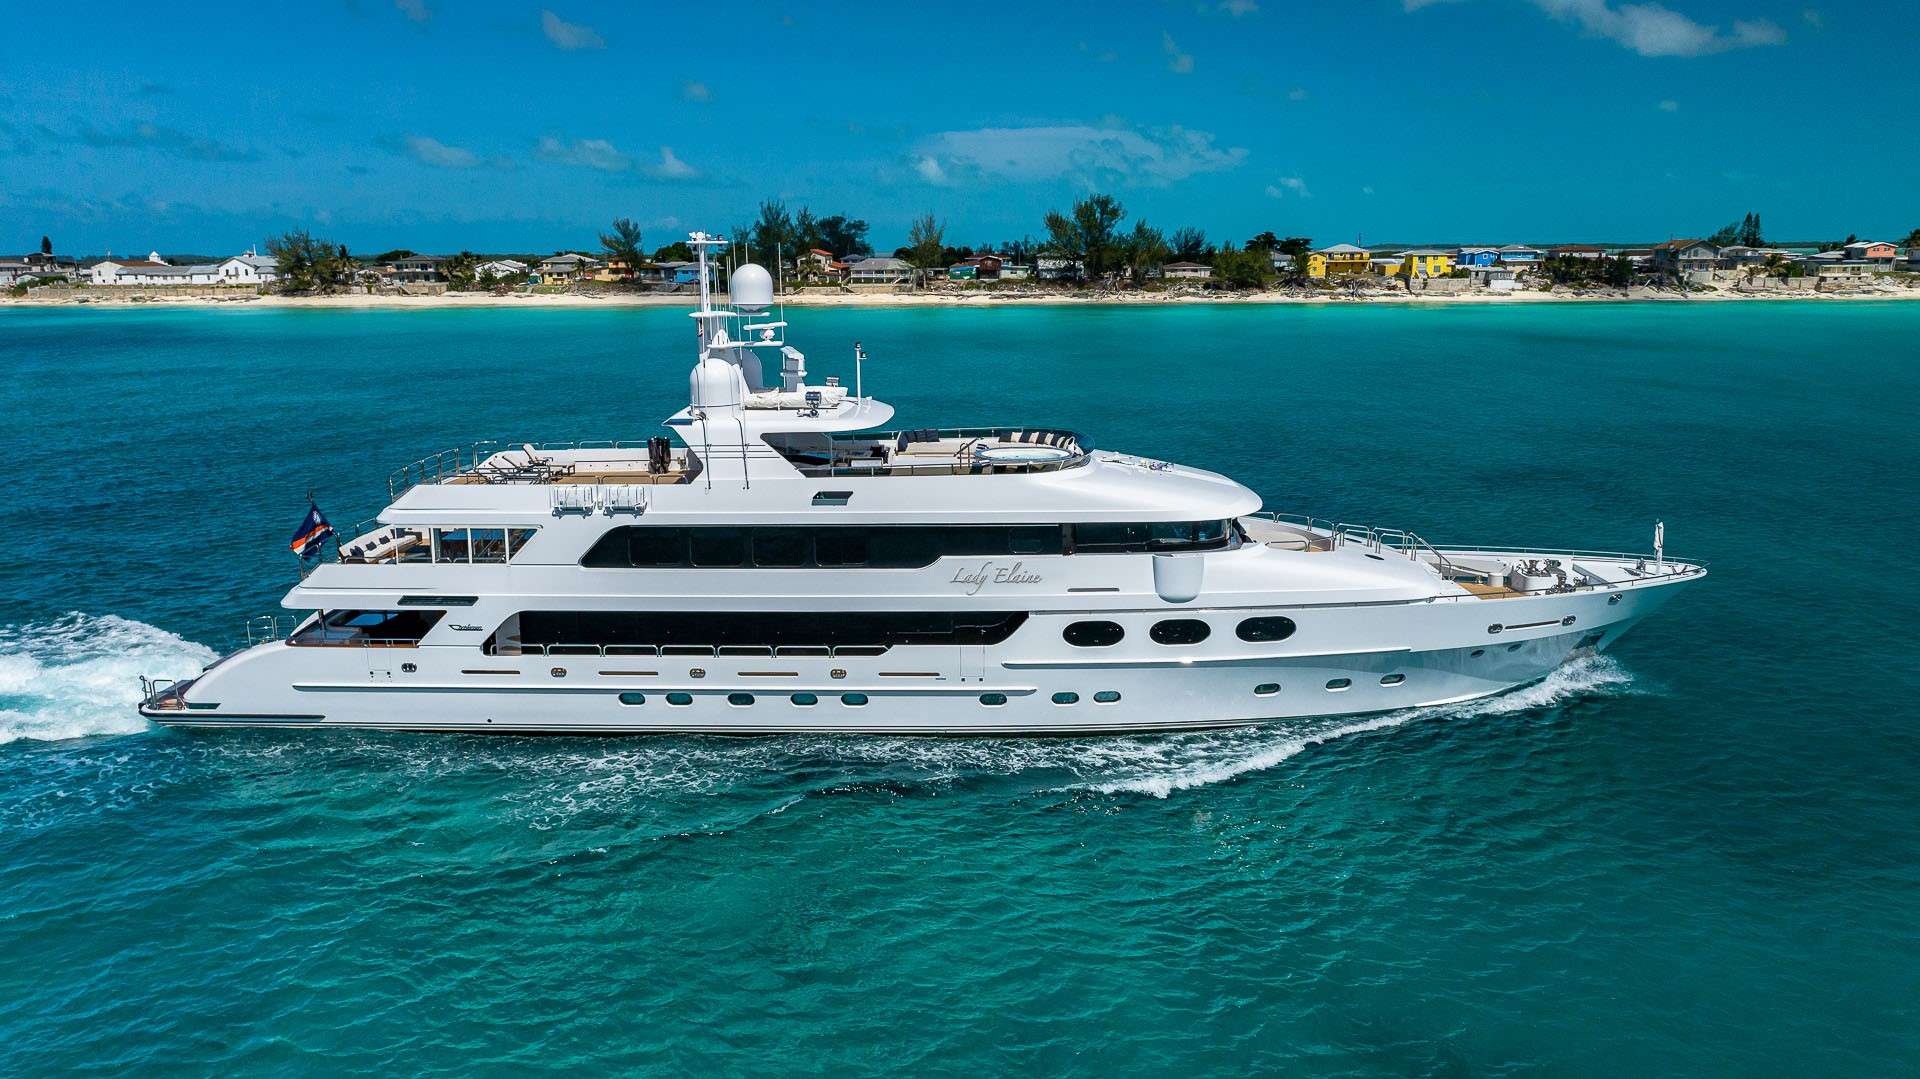 LADY ELAINE Yacht Charter - Ritzy Charters